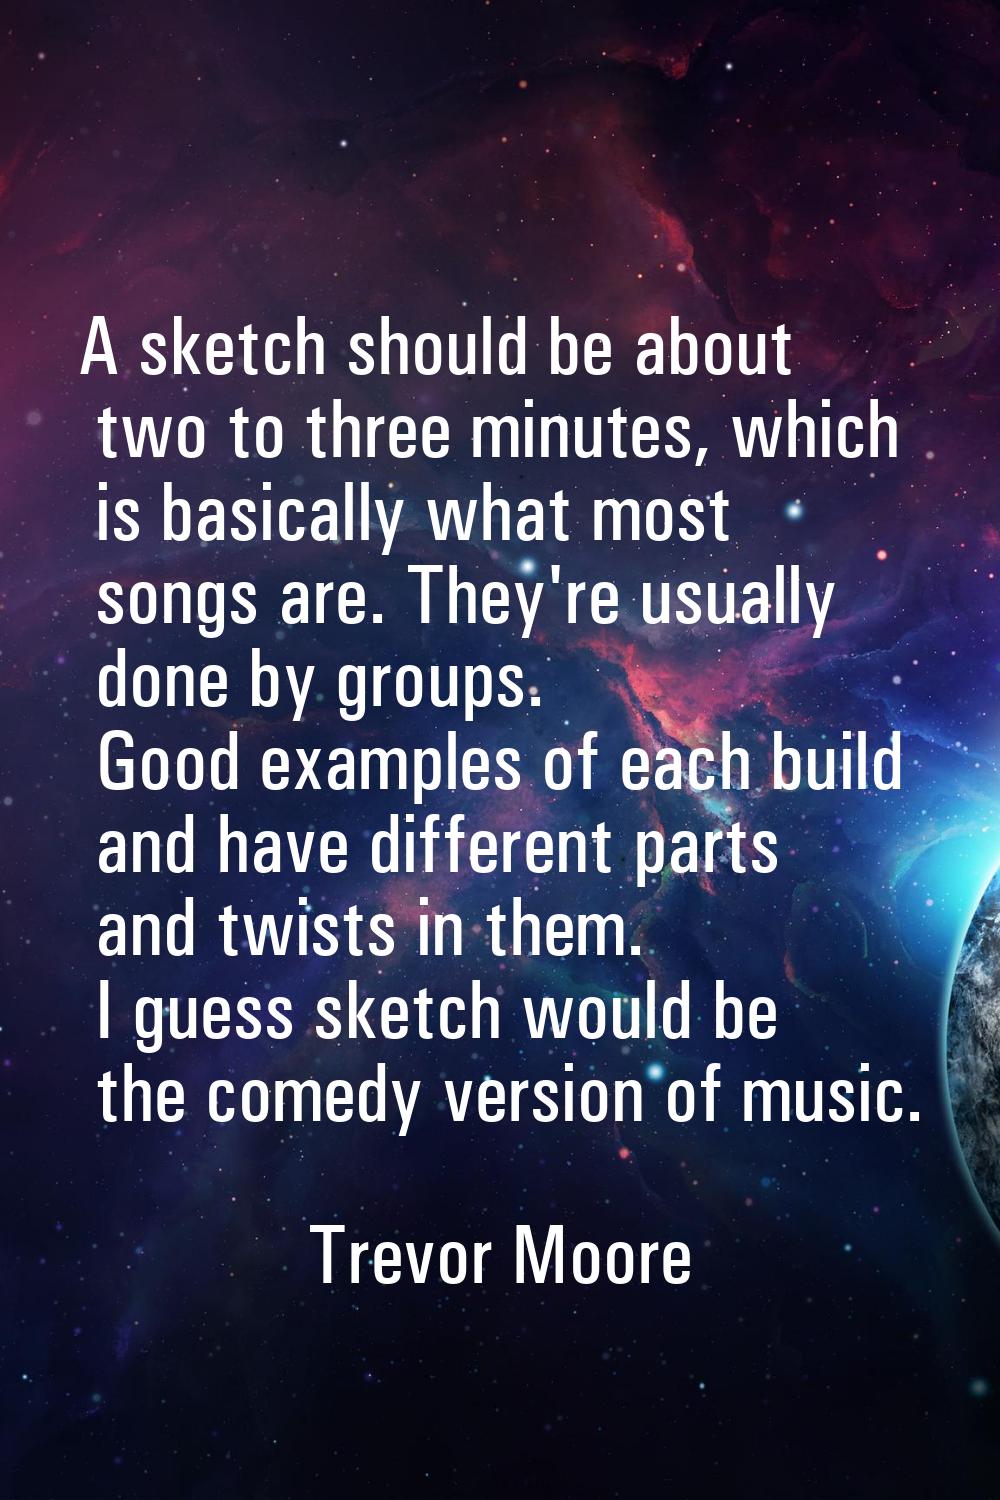 A sketch should be about two to three minutes, which is basically what most songs are. They're usua